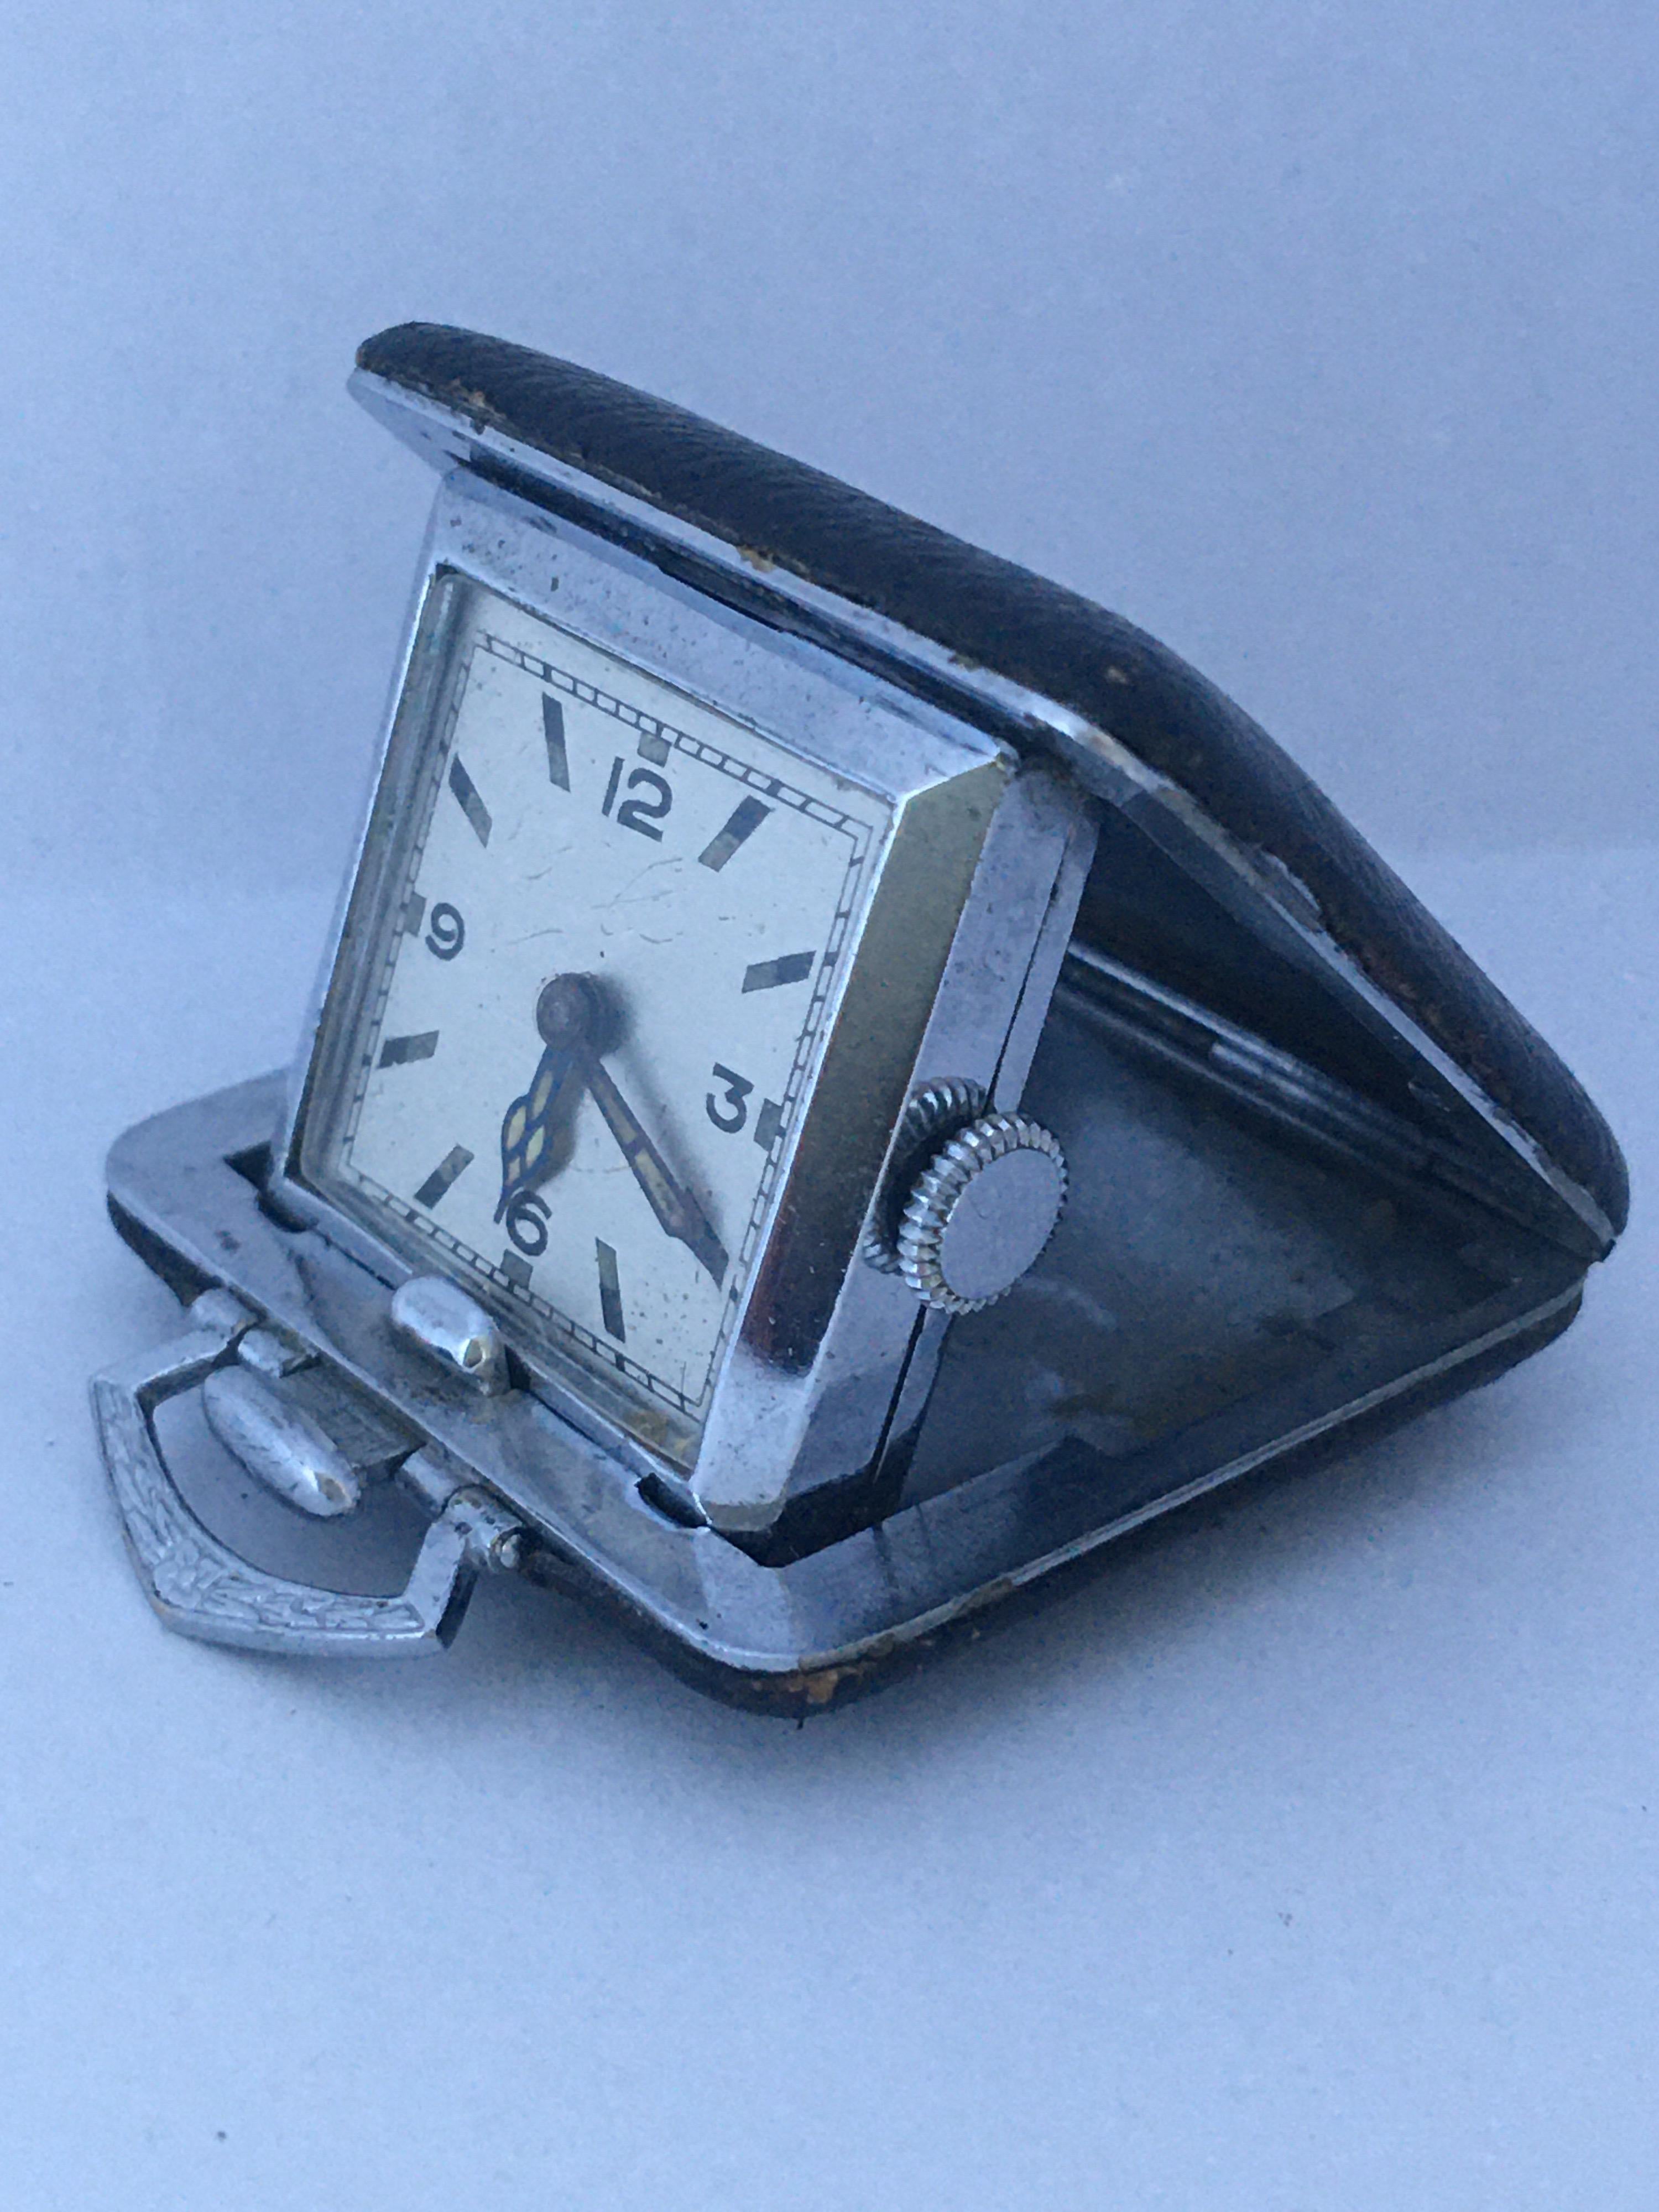 This clock is in good working condition and it is ticking well. Visible signs of ageing and wear with light scratches on the silver plated case and on the glass. The black cover case is a bit worn as shown. 

Please study the images carefully as